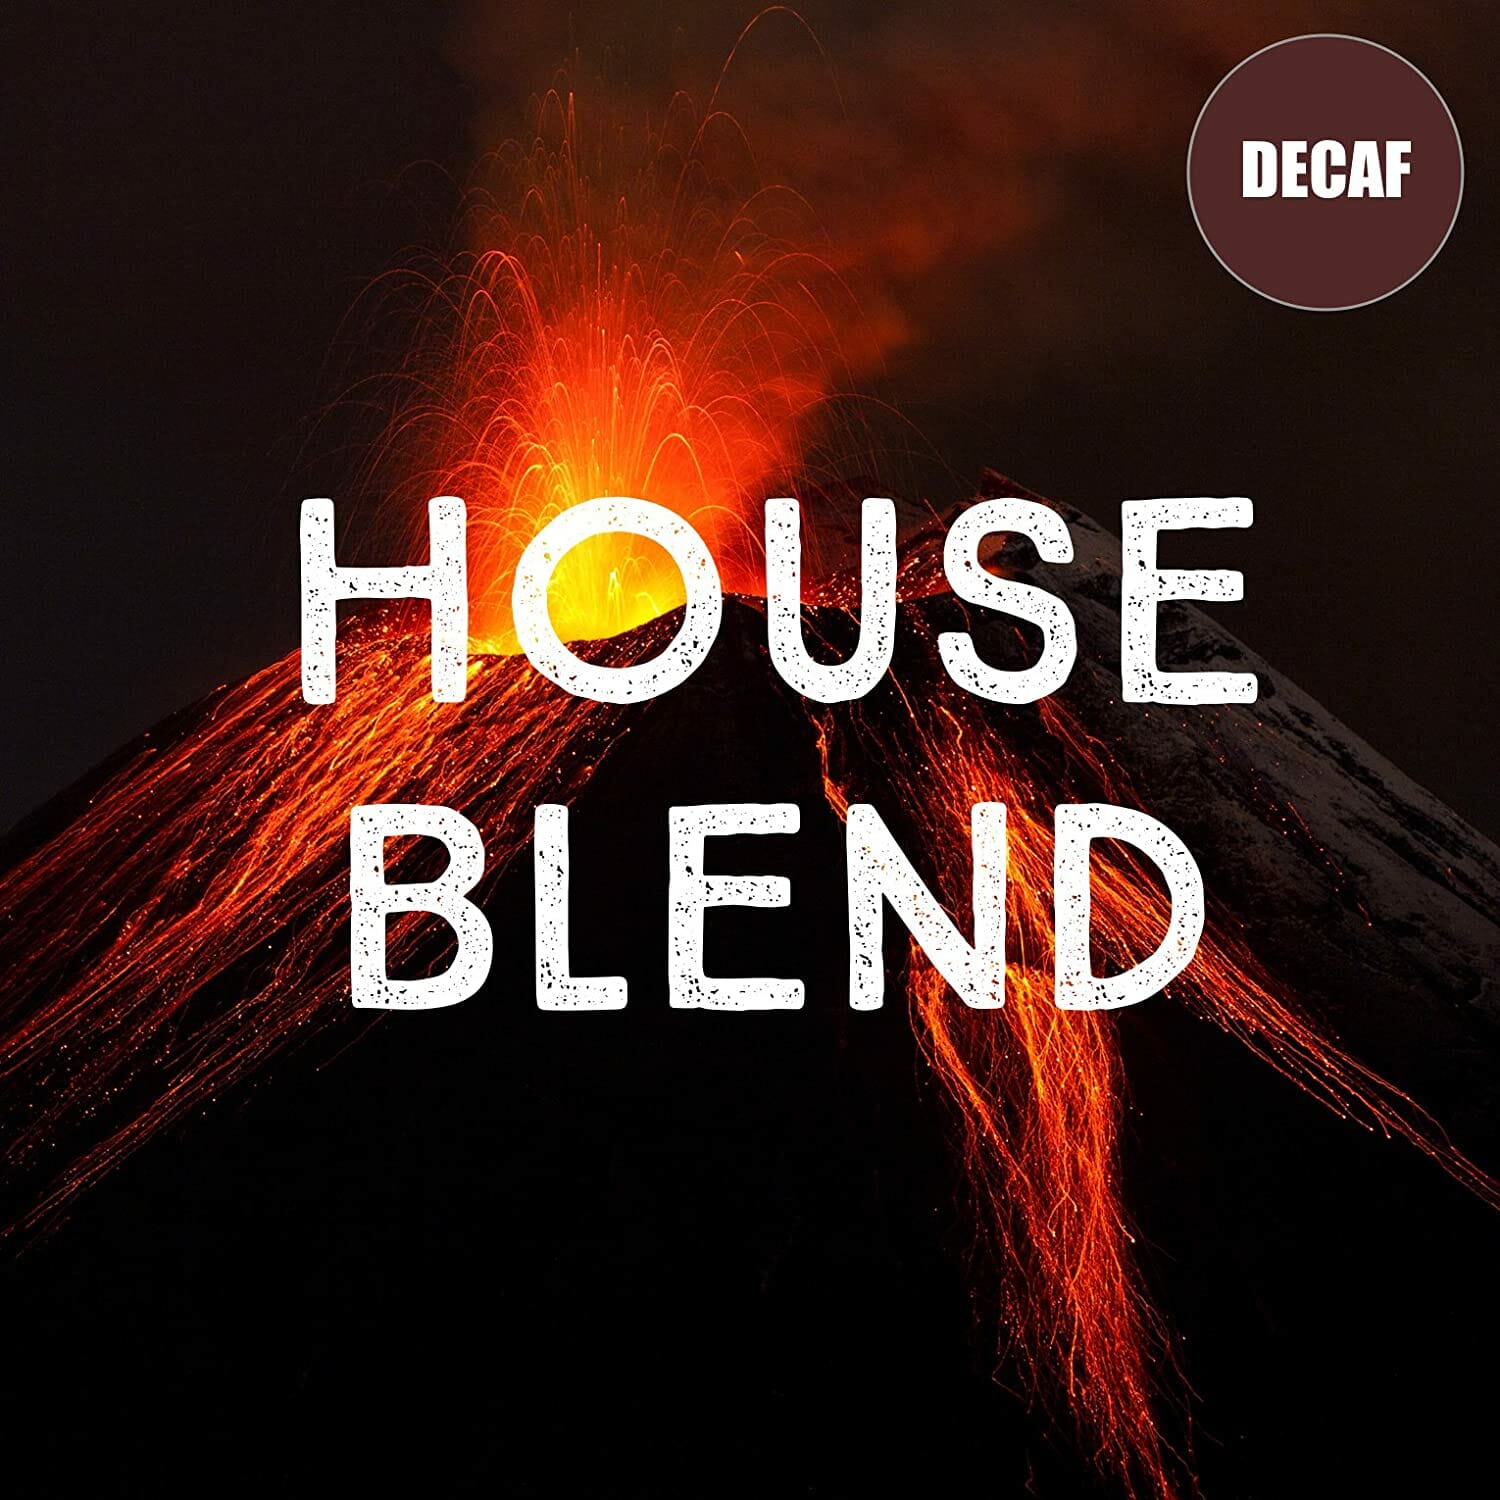 Volcanica House Blend Decaf Coffee